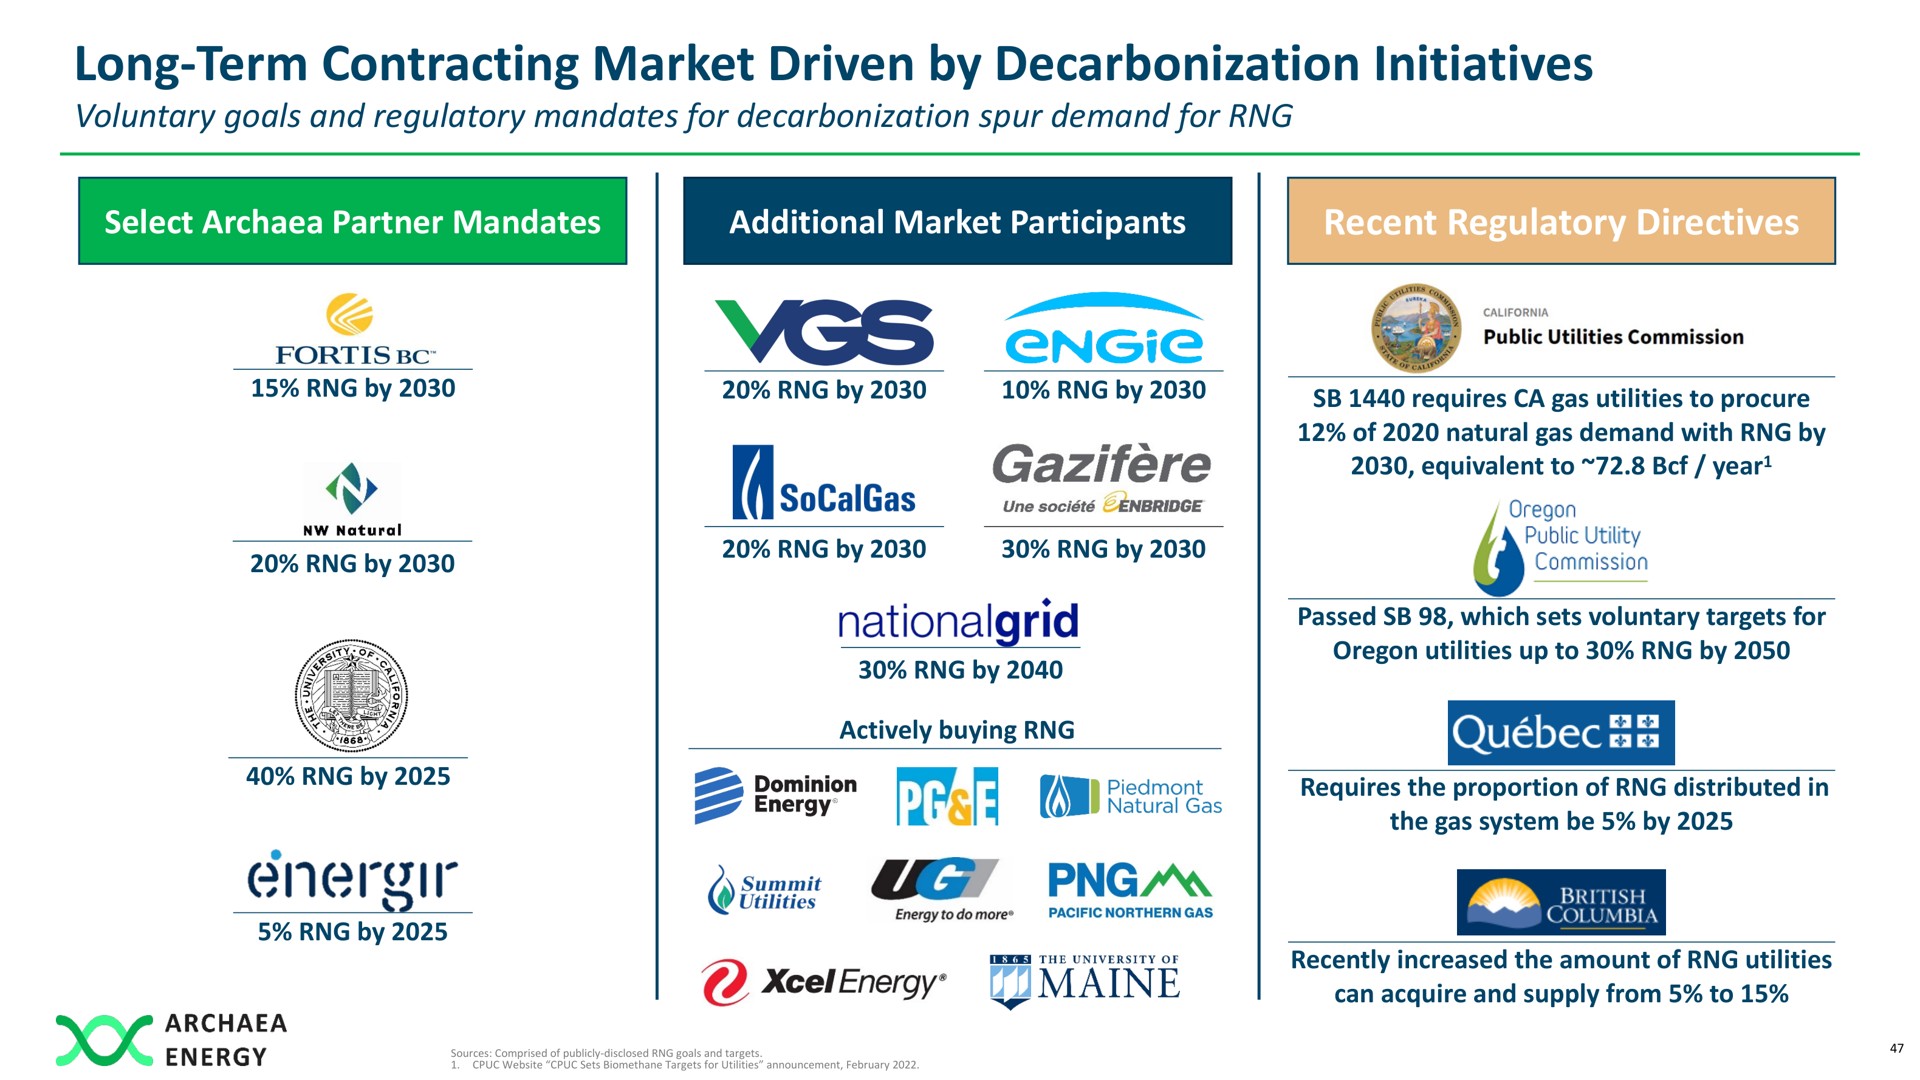 long term contracting market driven by decarbonization initiatives vss cro tas summit | Archaea Energy